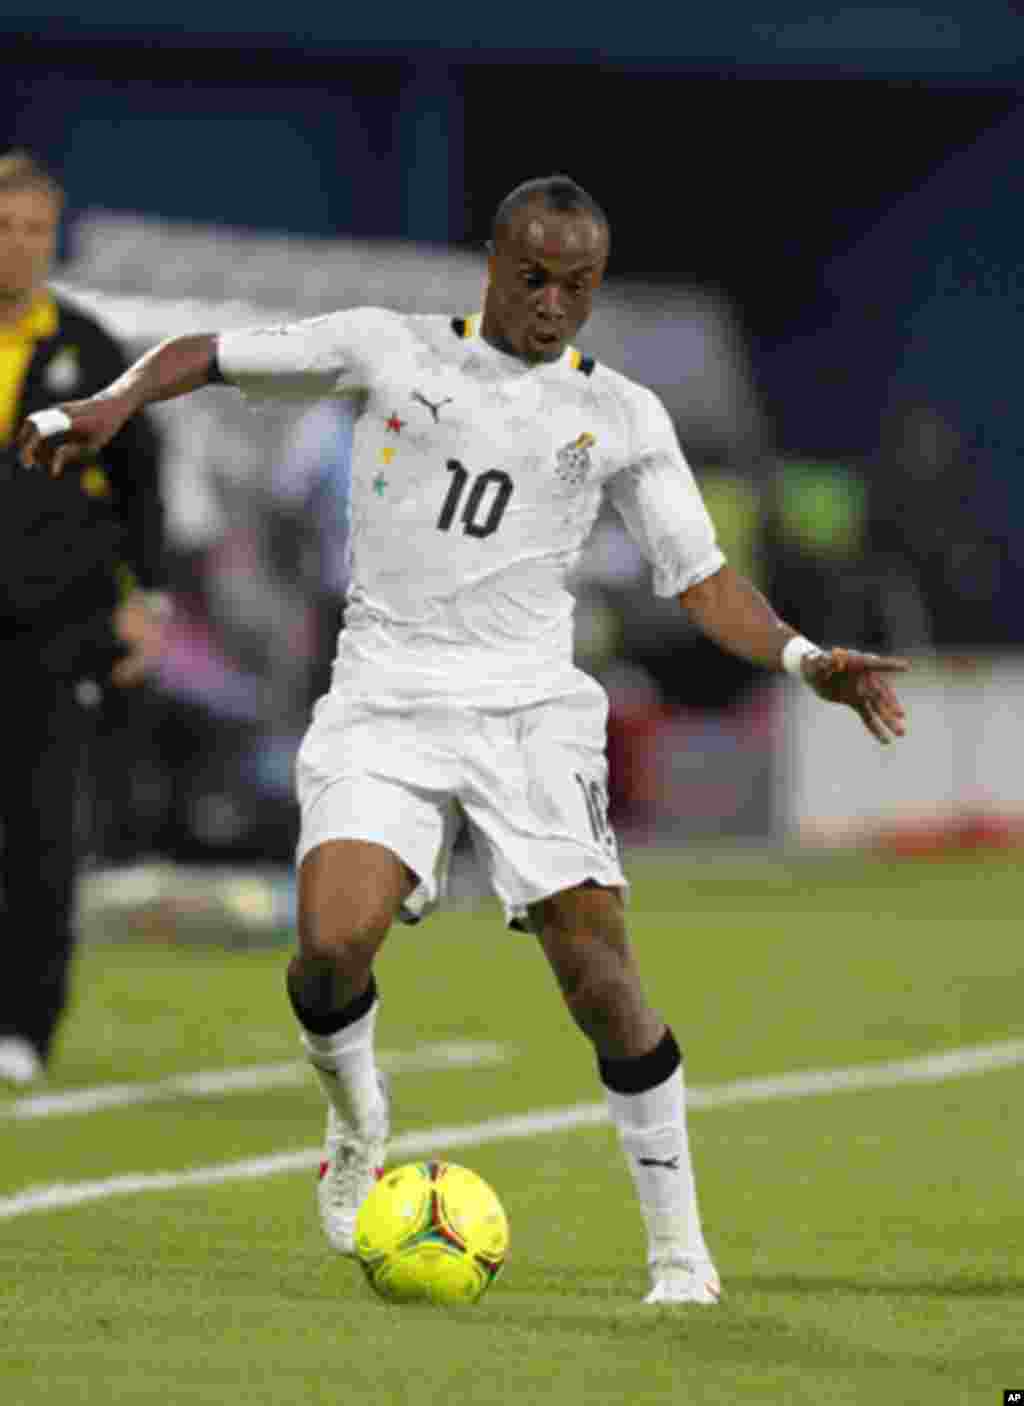 Ghana's Andre Ayew runs with the ball during their African Cup of Nations Group D soccer match against Botswana in FranceVille Stadium January 24, 2012.